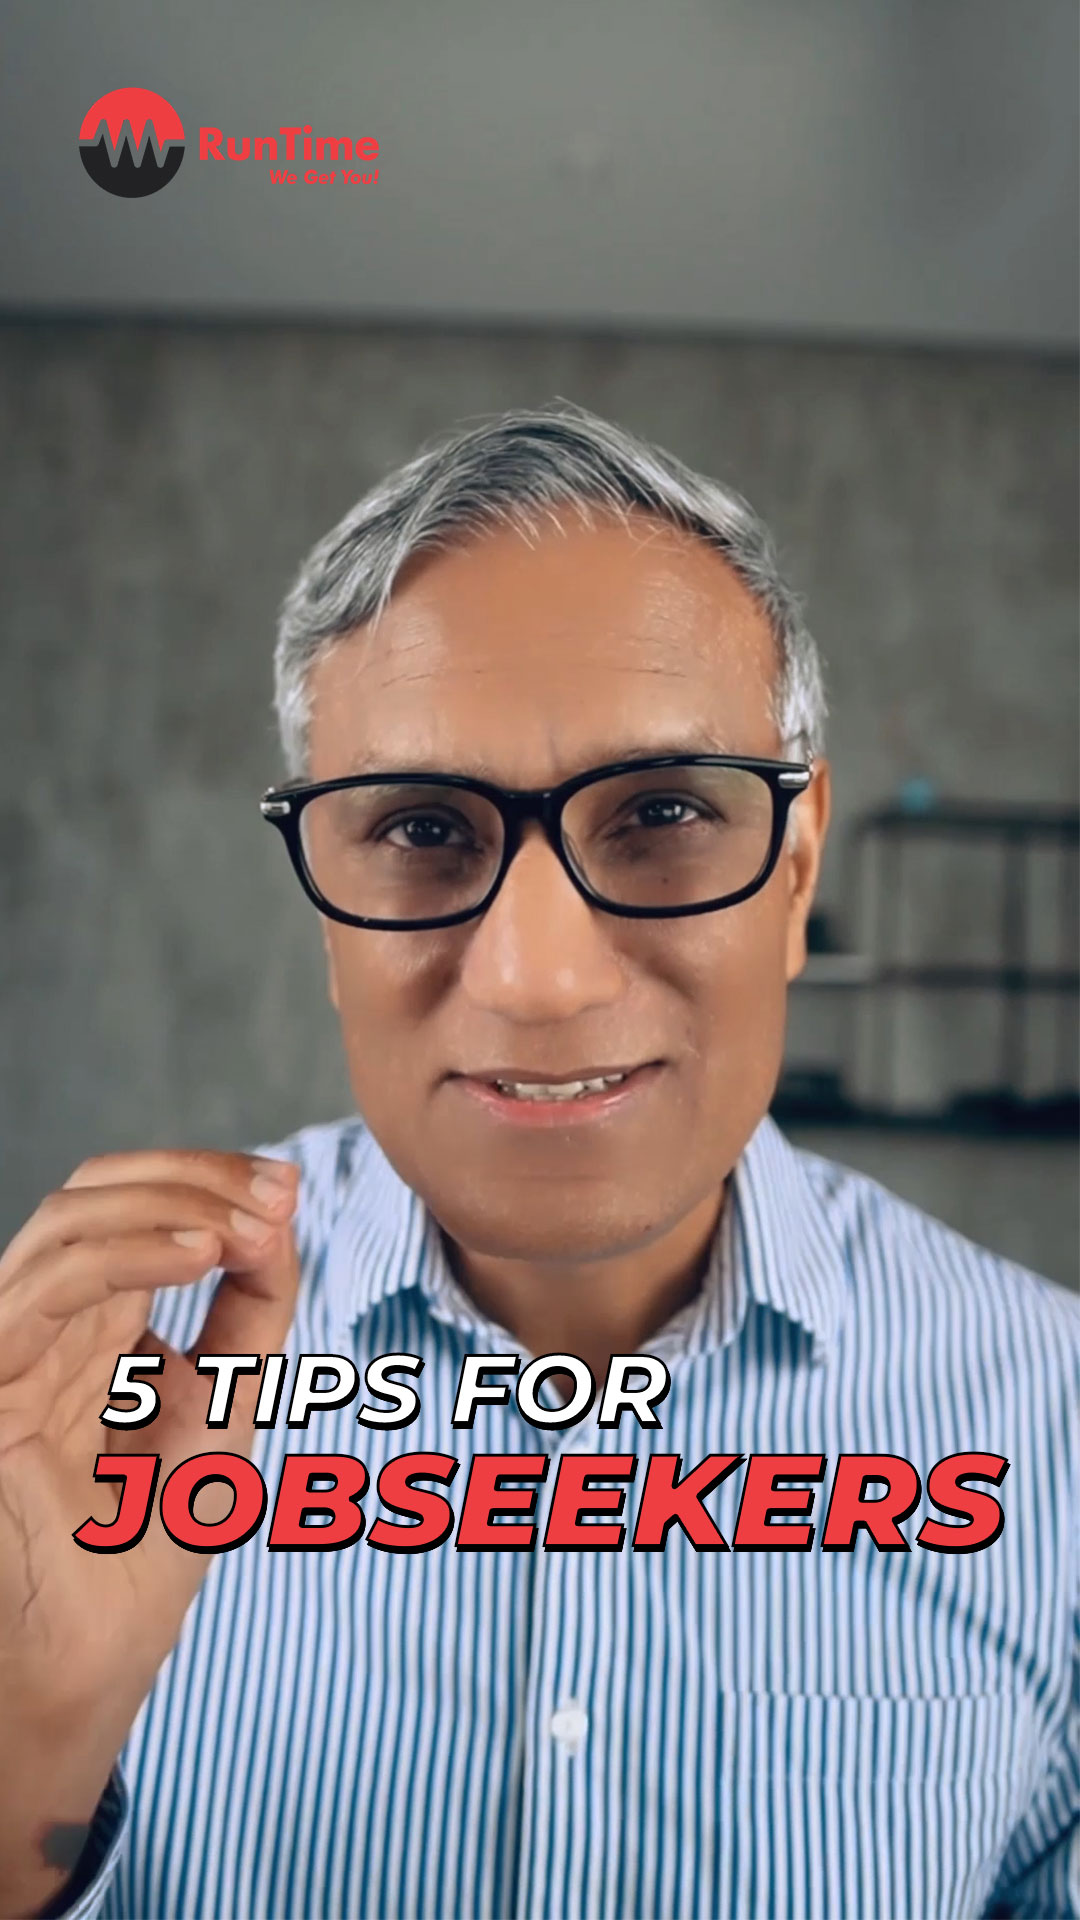 5-Tips-for-Jobseekers-Thumbnail-2nd